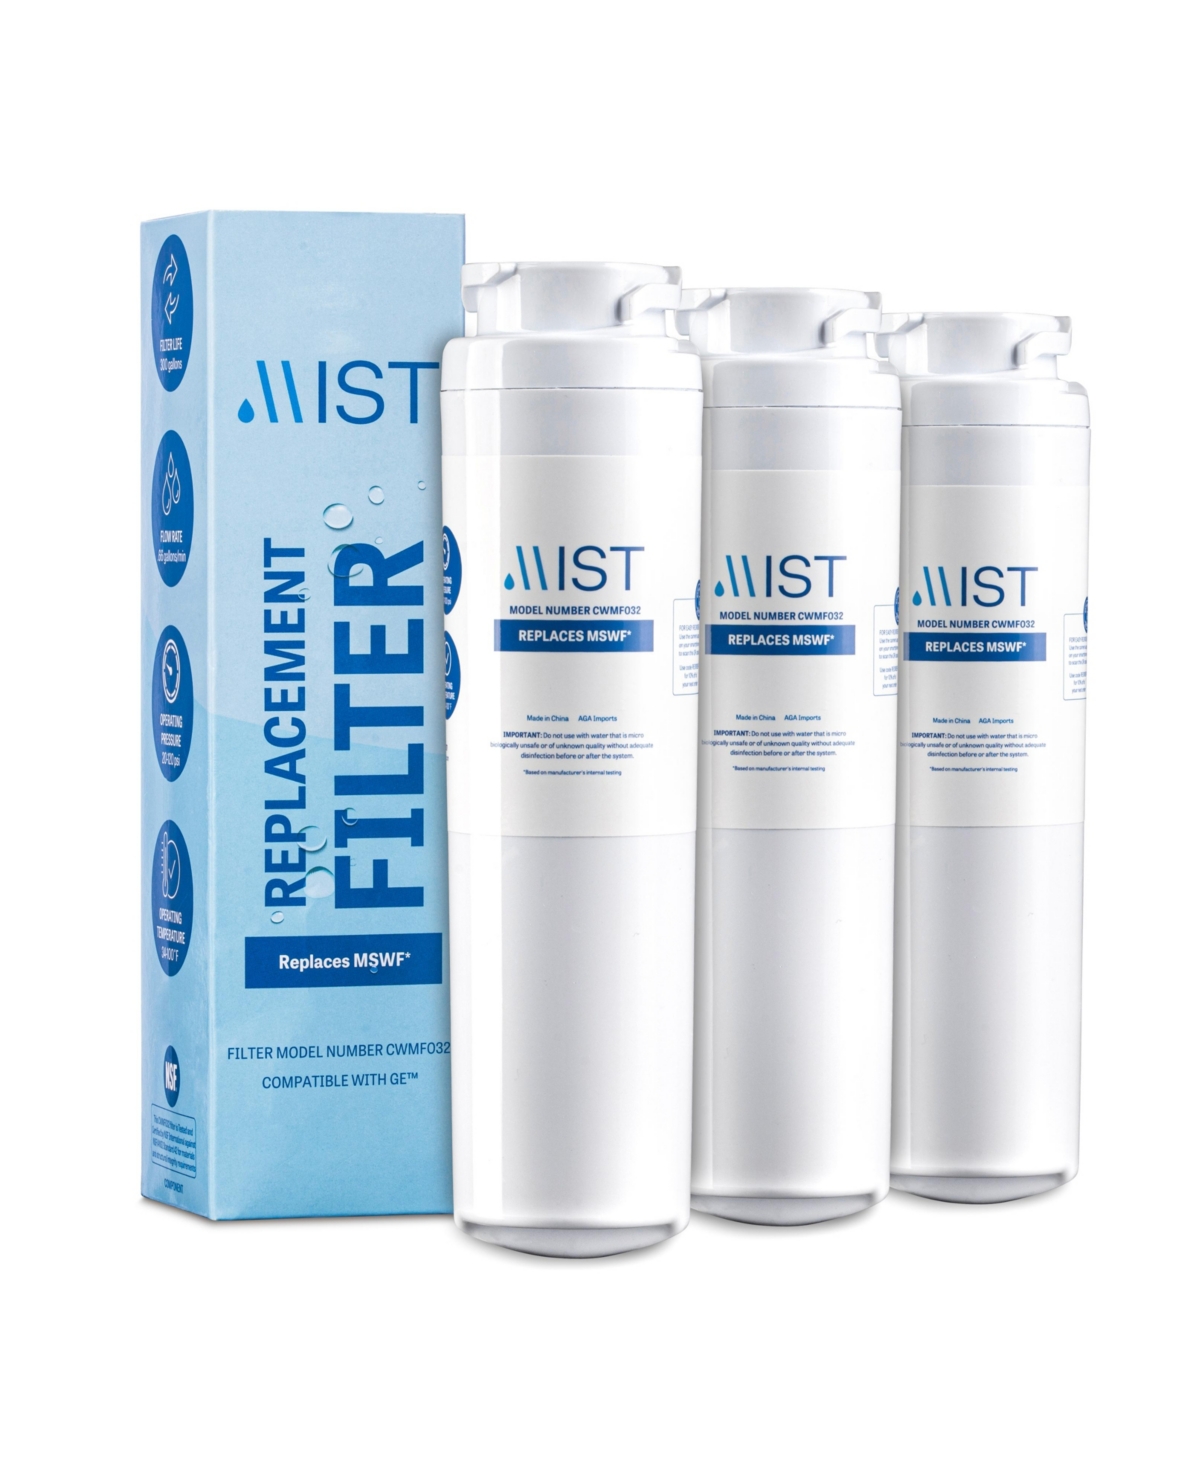 Mswf Refrigerator Water Filter Replacement 3 Pack - Mist - White